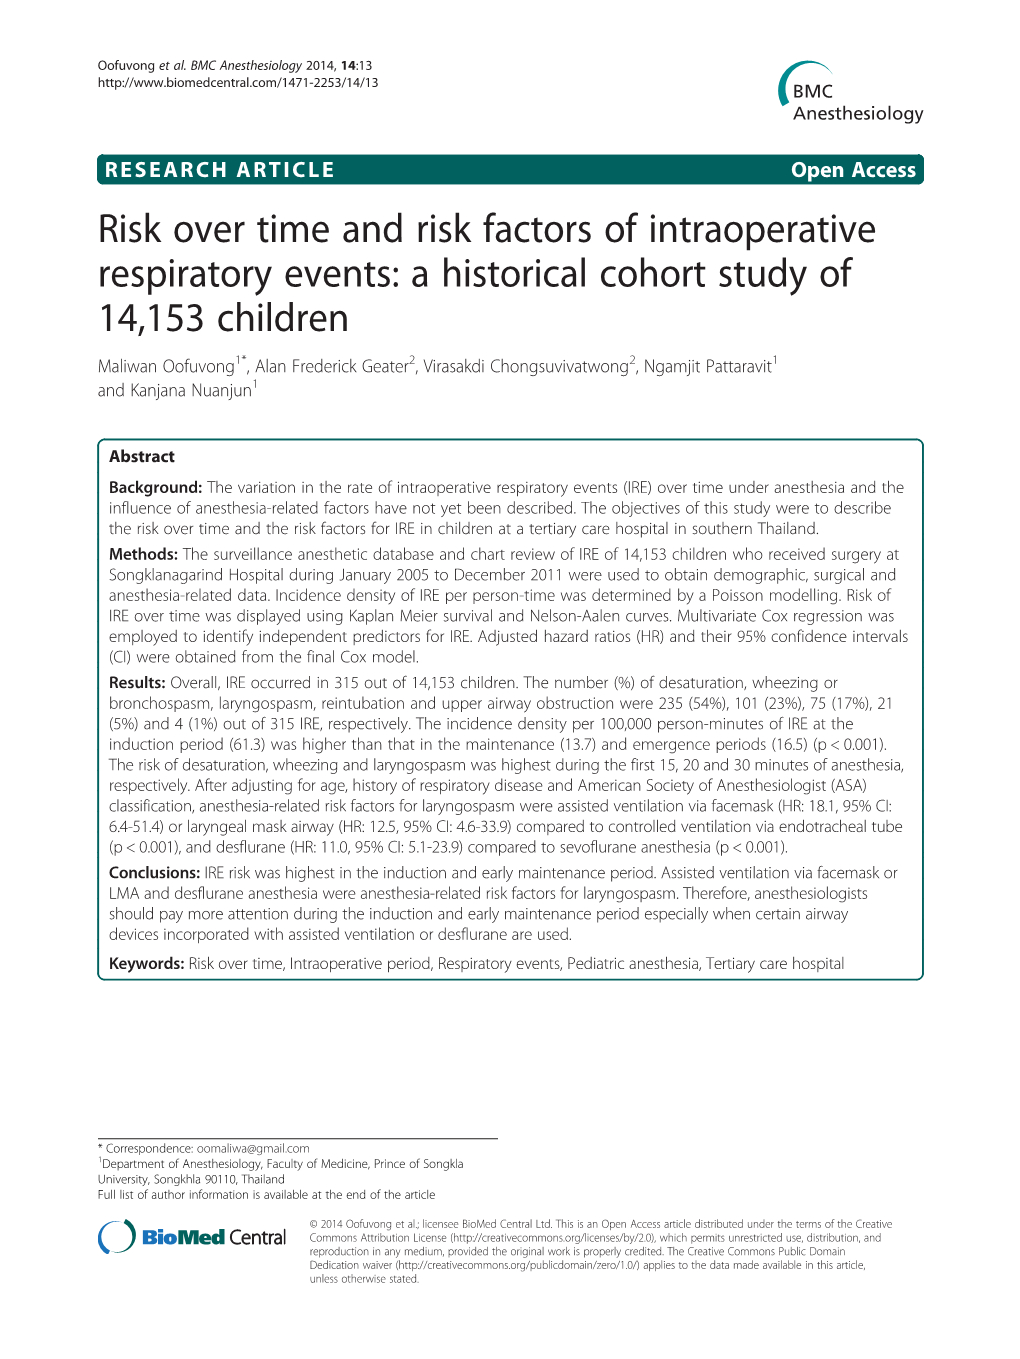 Risk Over Time and Risk Factors of Intraoperative Respiratory Events: A